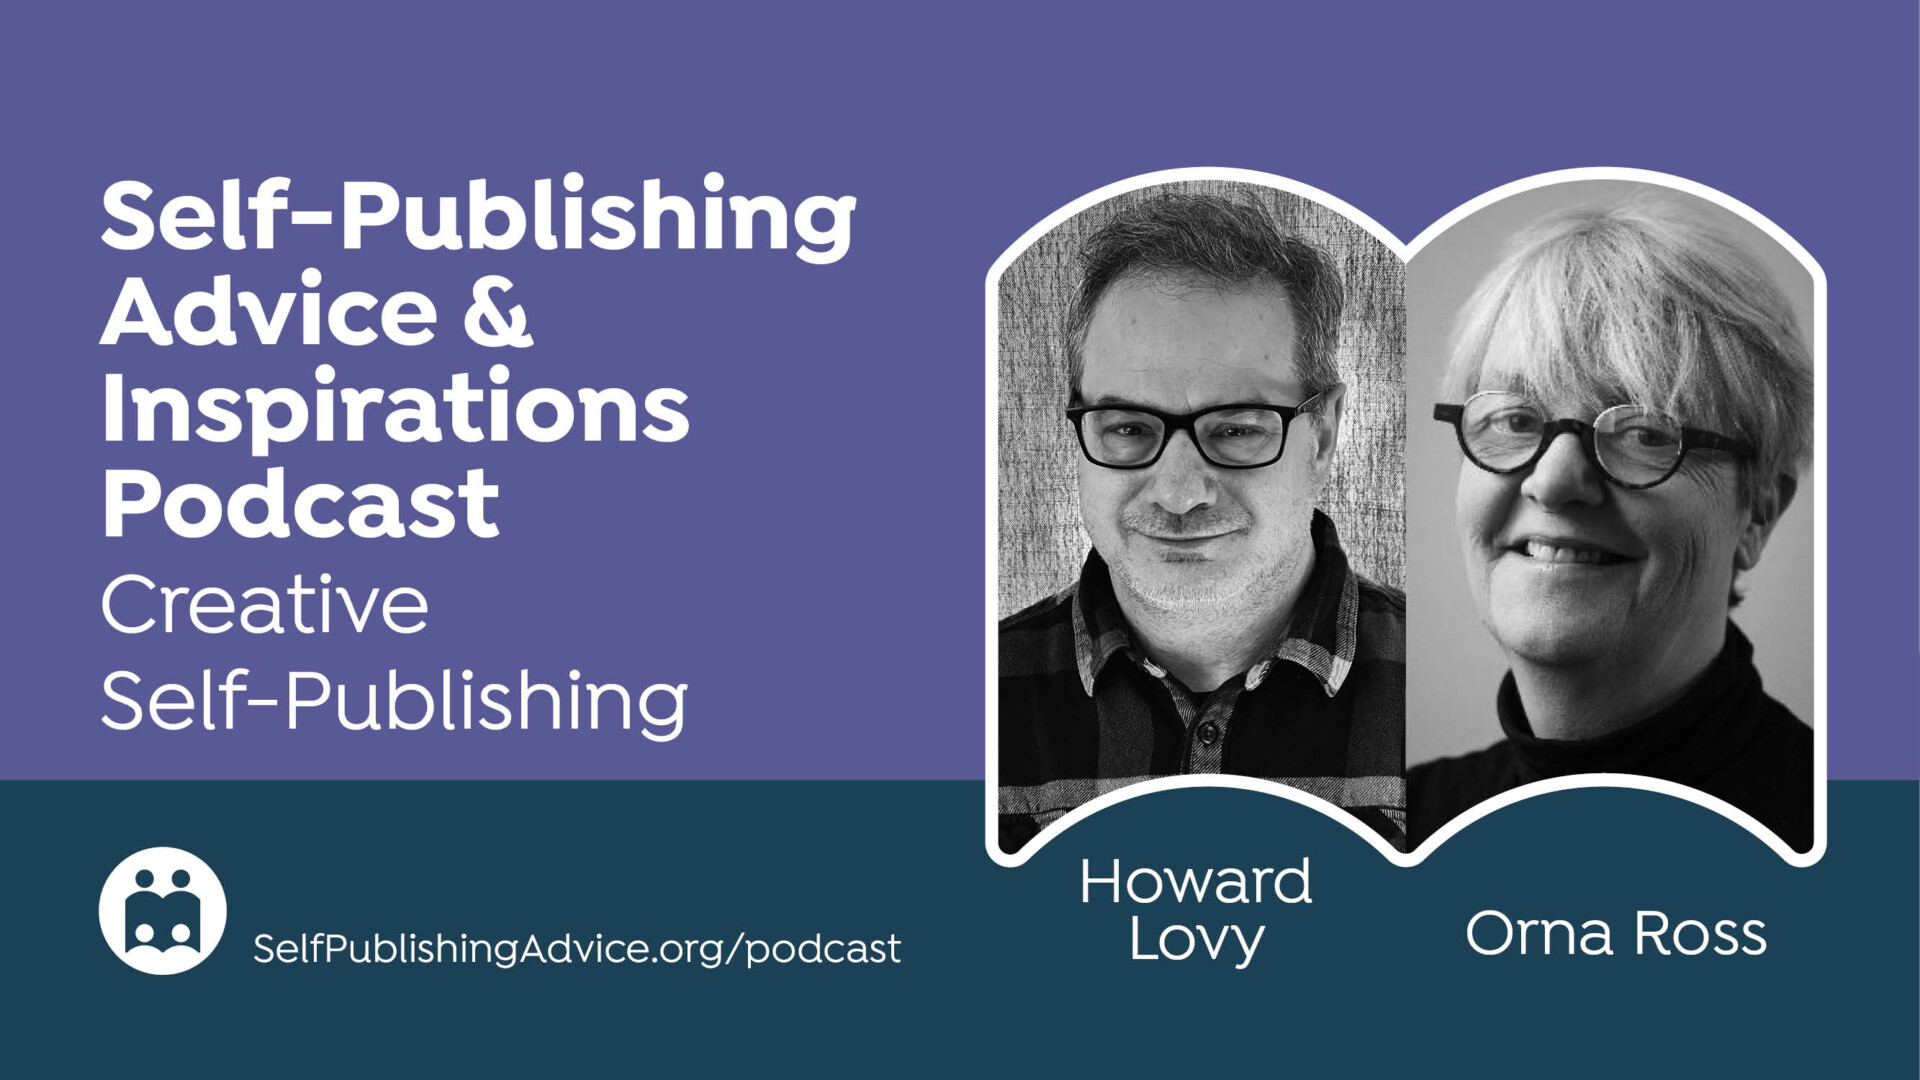 Annual Planning For Your Indie Author Business: Creative Self-Publishing Podcast With Orna Ross And Howard Lovy